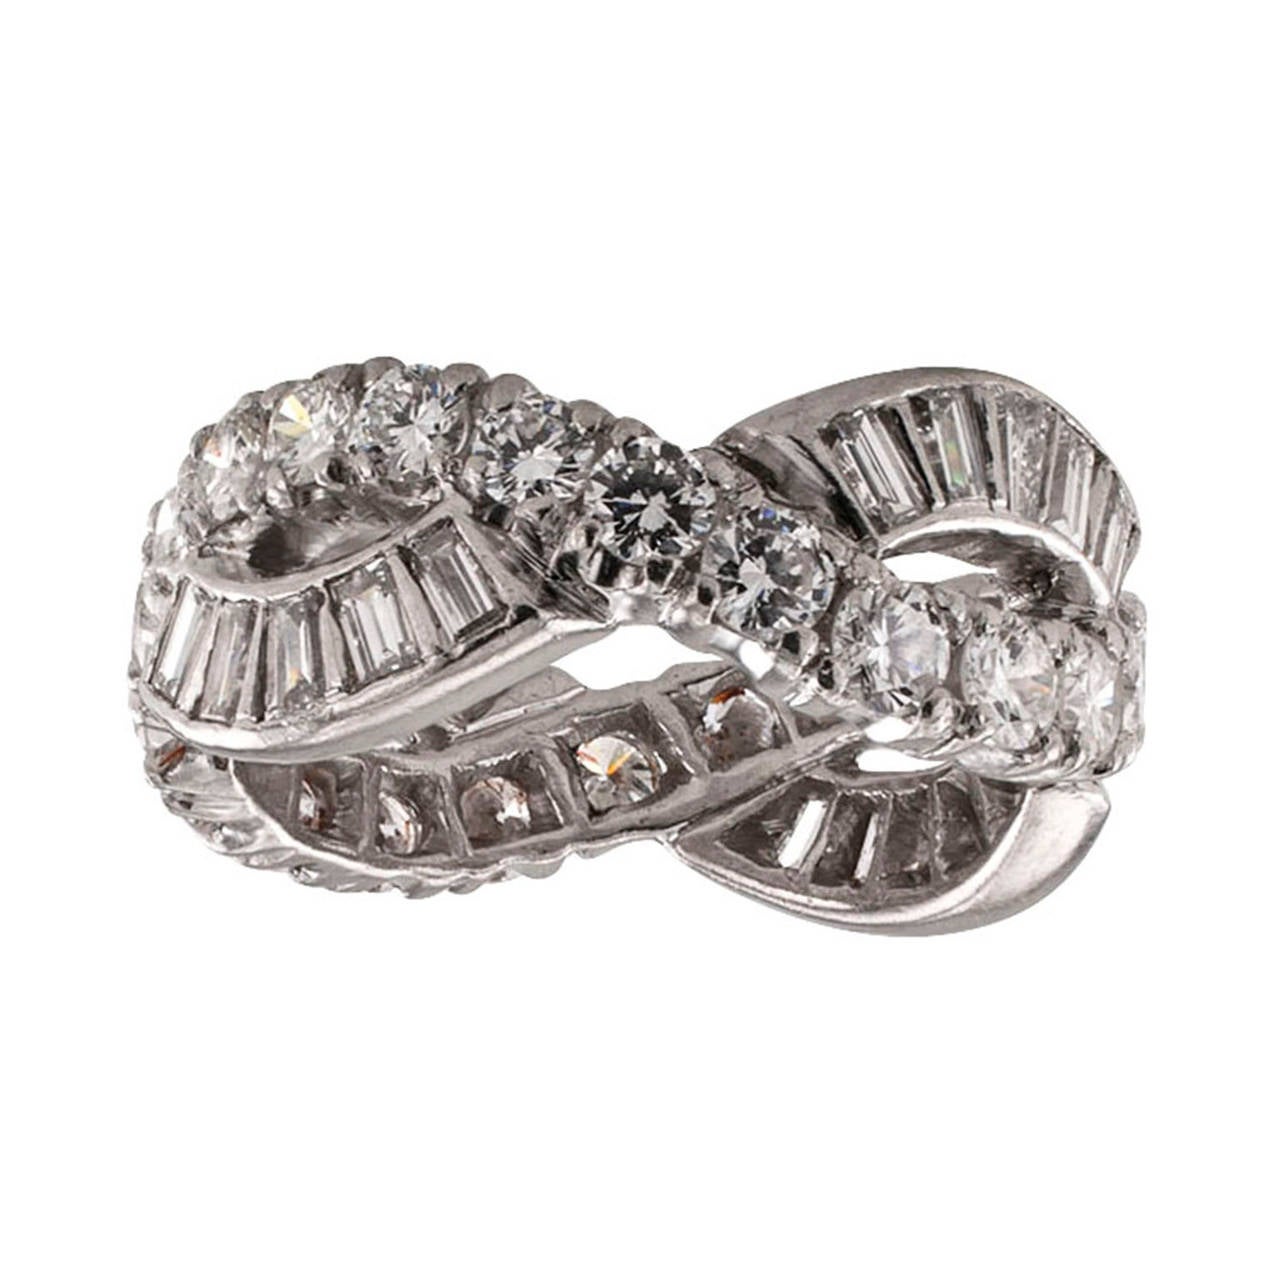 2.75 Carats Wide Eternity Diamond Platinum Ring

A great diamond eternity band, circa 1950.  The design composed of a curved  course of round brilliant-cut diamonds entwined with a course of baguette diamonds, the forty-four diamonds totaling